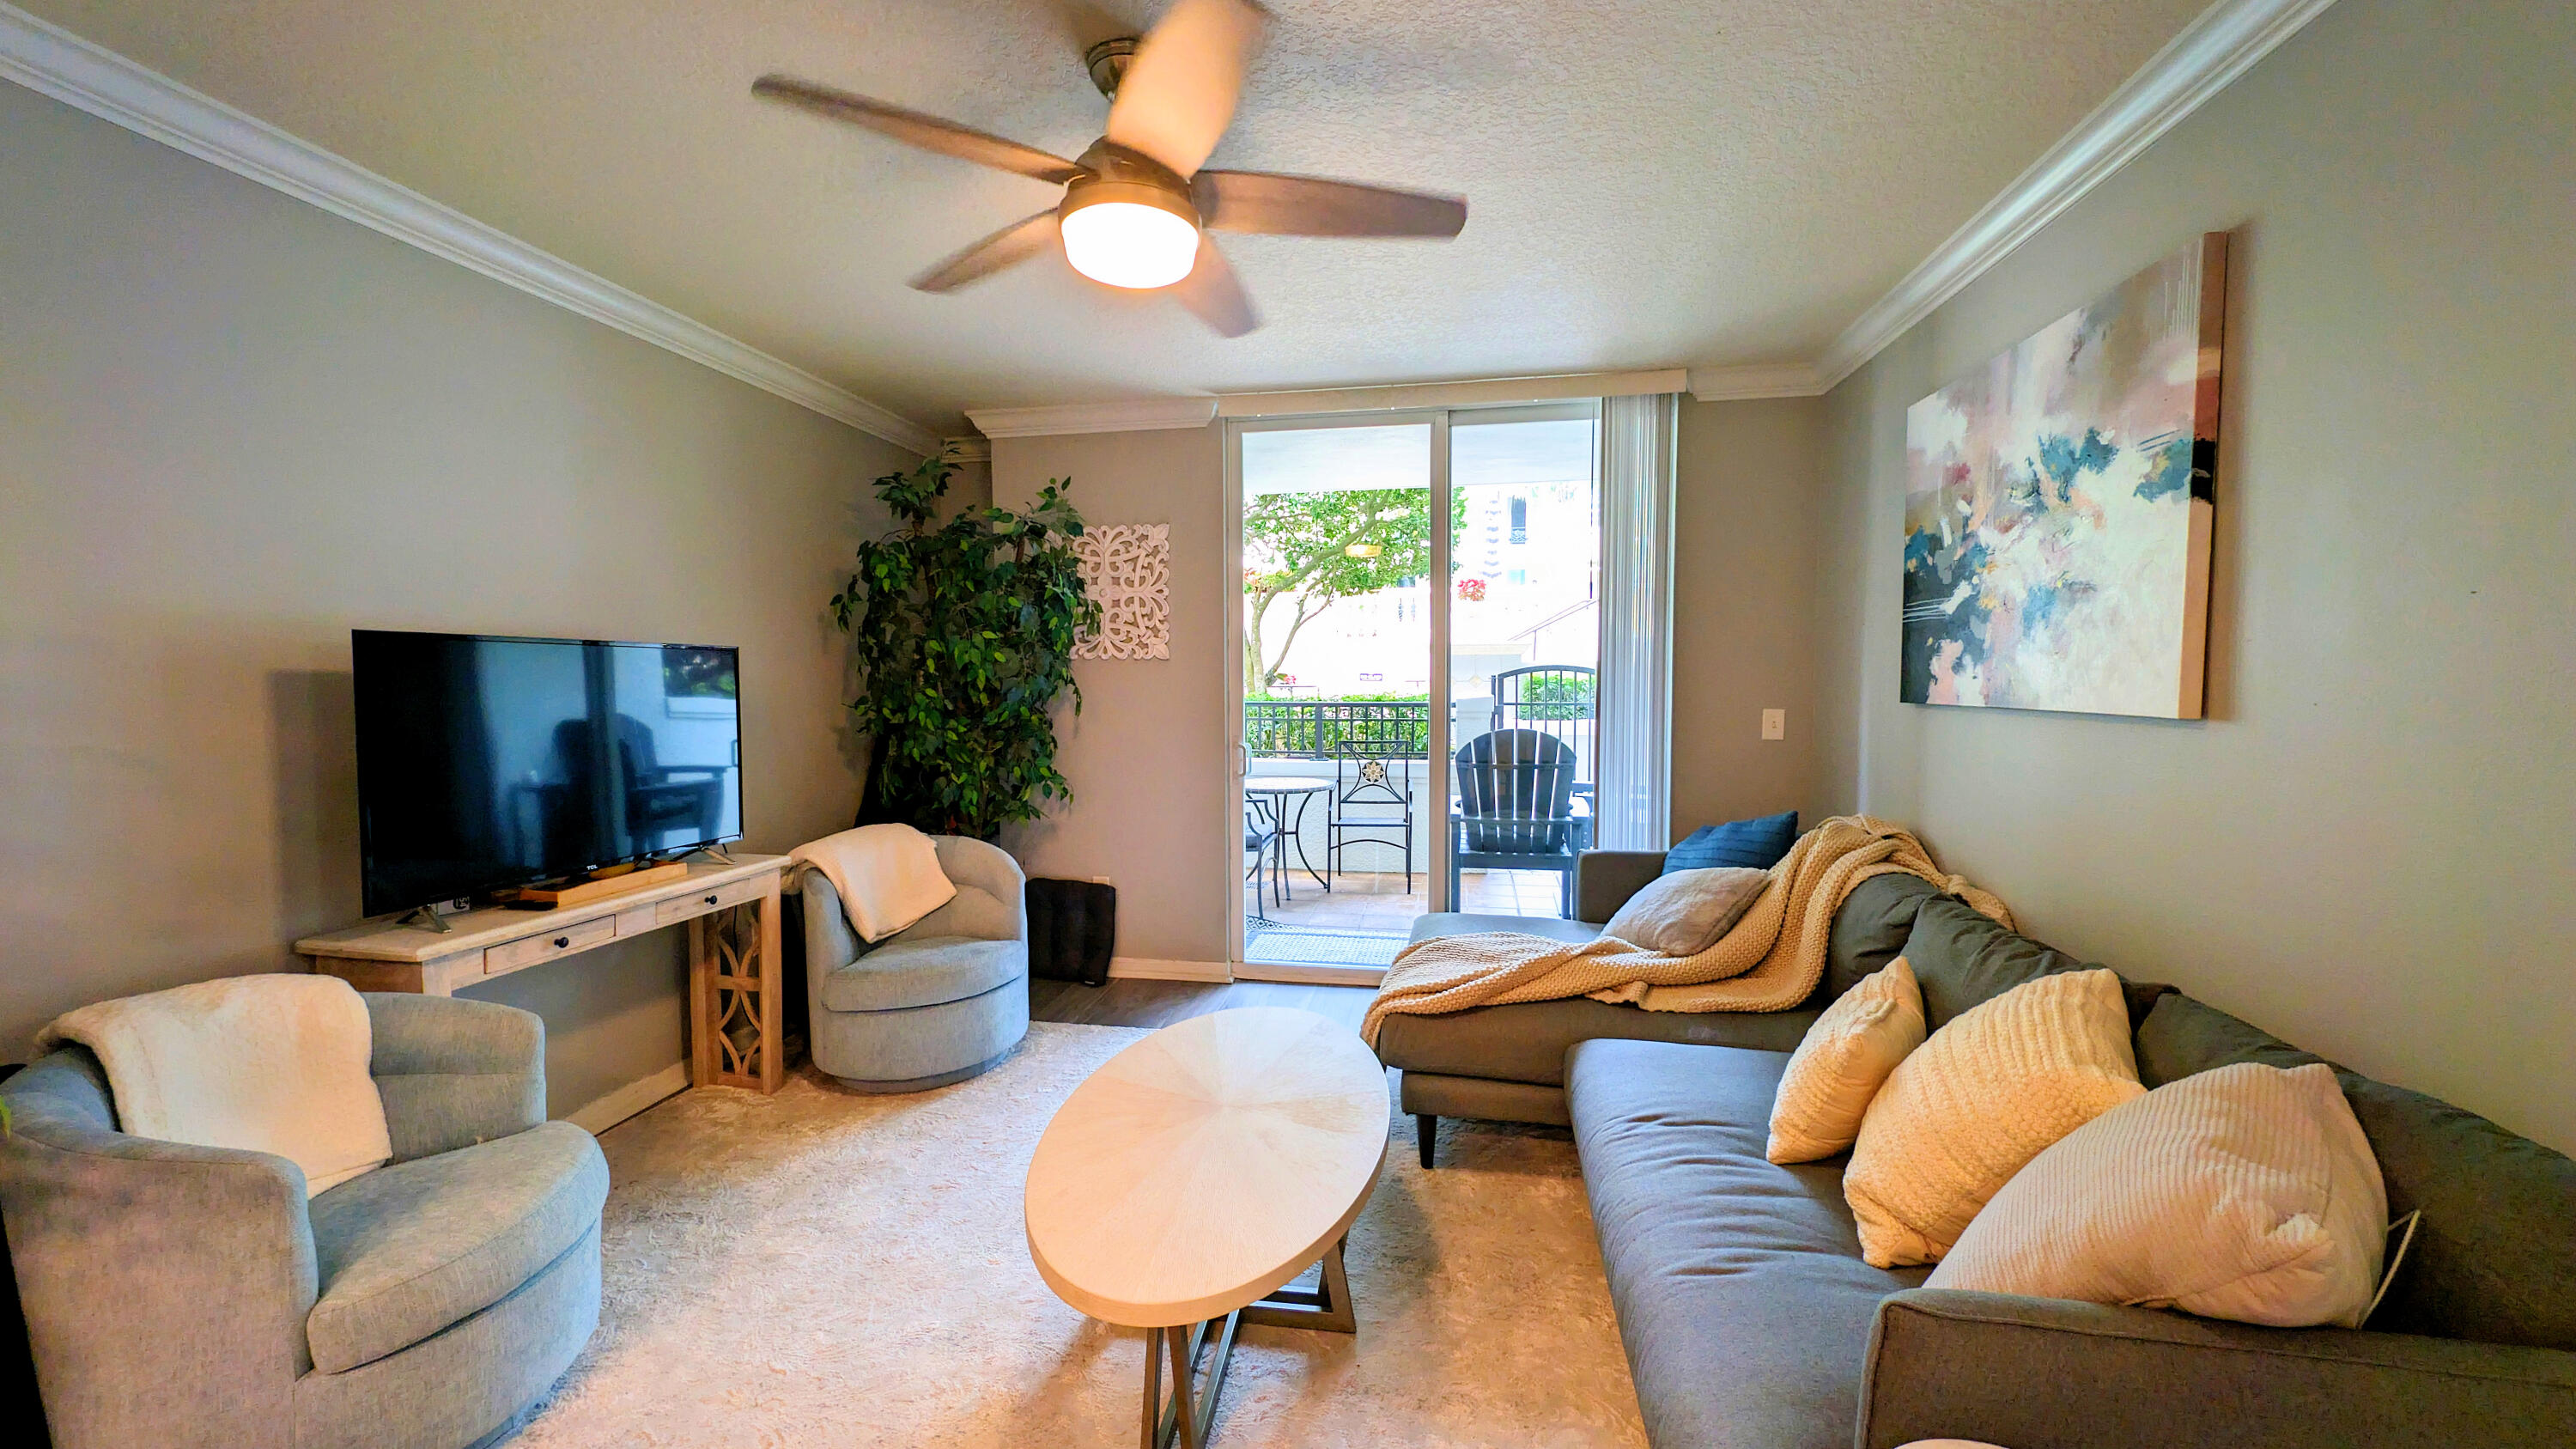 The Prado is two blocks from The Square, three blocks to the intracoastal waterway, and approximately fifteen blocks to the beach and Palm Beach island. Not only is the convenience of location within the heart of the city essential, but so is the location of this residence within the Prado. Located on the pool level, this unique one-bedroom residence has a walk-out to the pool from your private gated patio. Go for a swim, hit the hot tub, fitness center, steam room, and club room without walking through the hallway. This is the perfect one-bedroom with a new air conditioning and water heater unit replaced in the summer of 2023, and the appliances were replaced in 2022, including the washer and dryer. This is for the discerning buyer who wants a convenient living space and lifestyle.